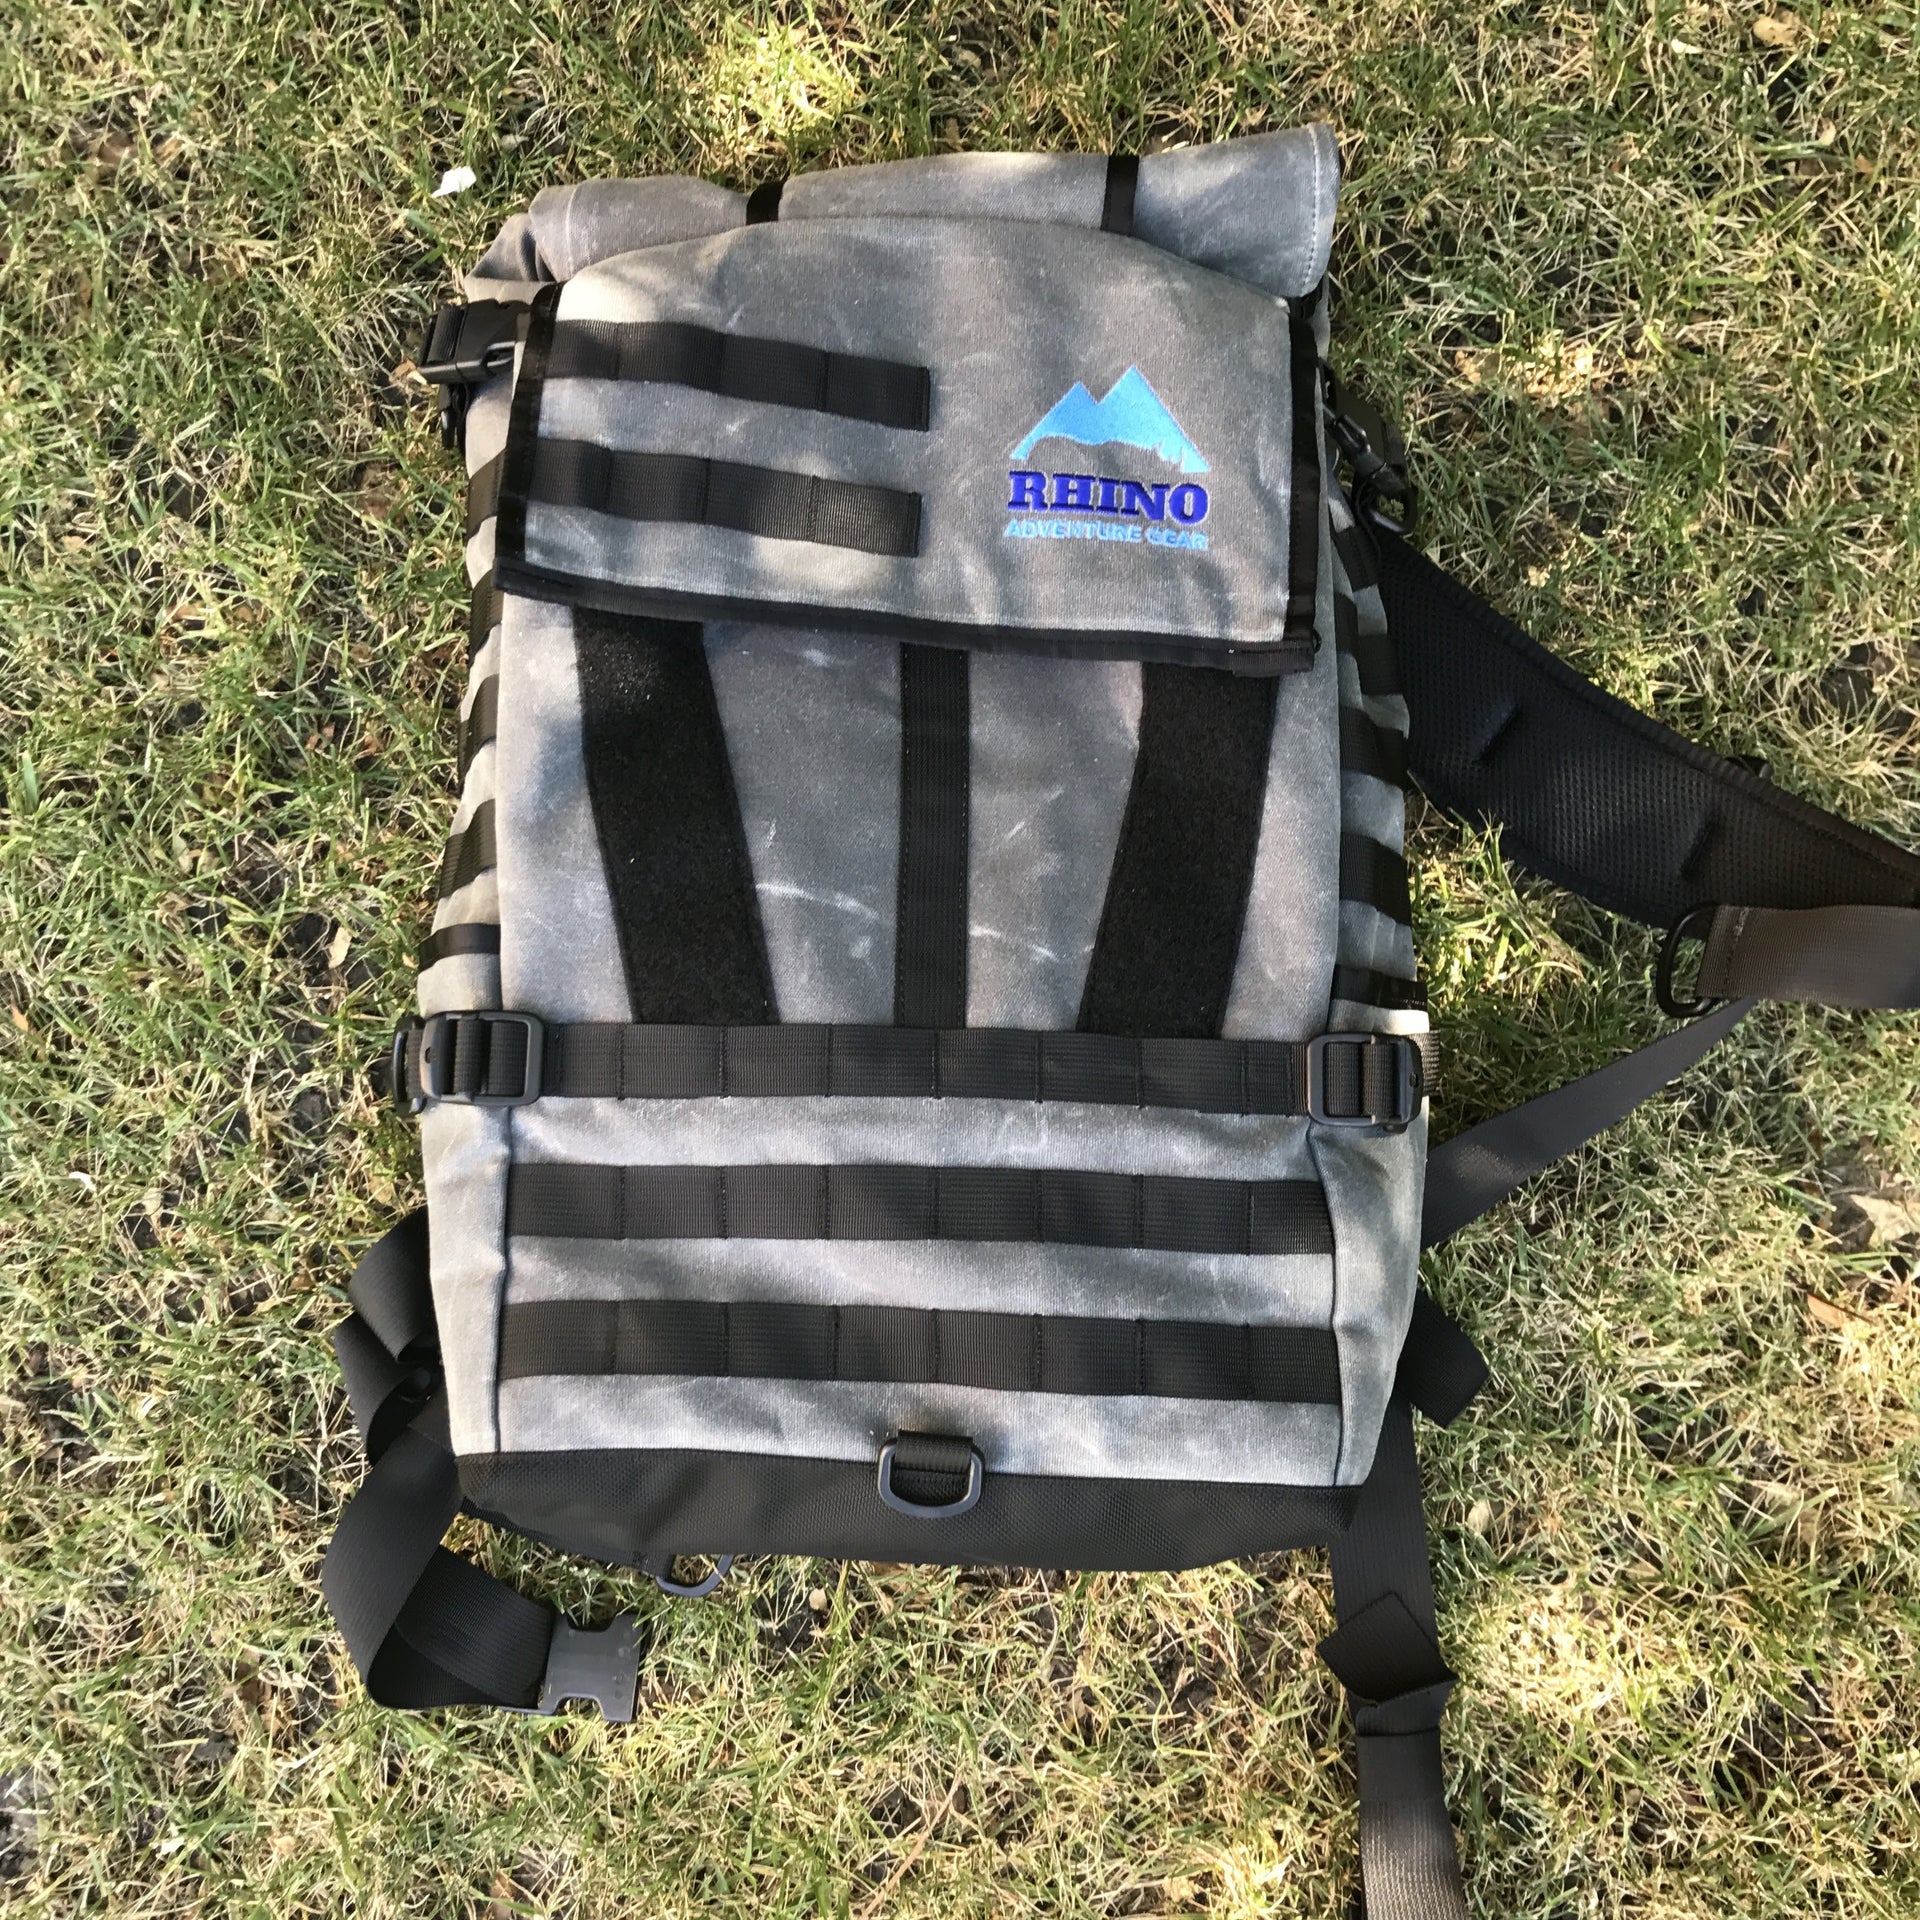 Adventure Backpack with Rhino Adventure Gear embroidered logo laying on the grass